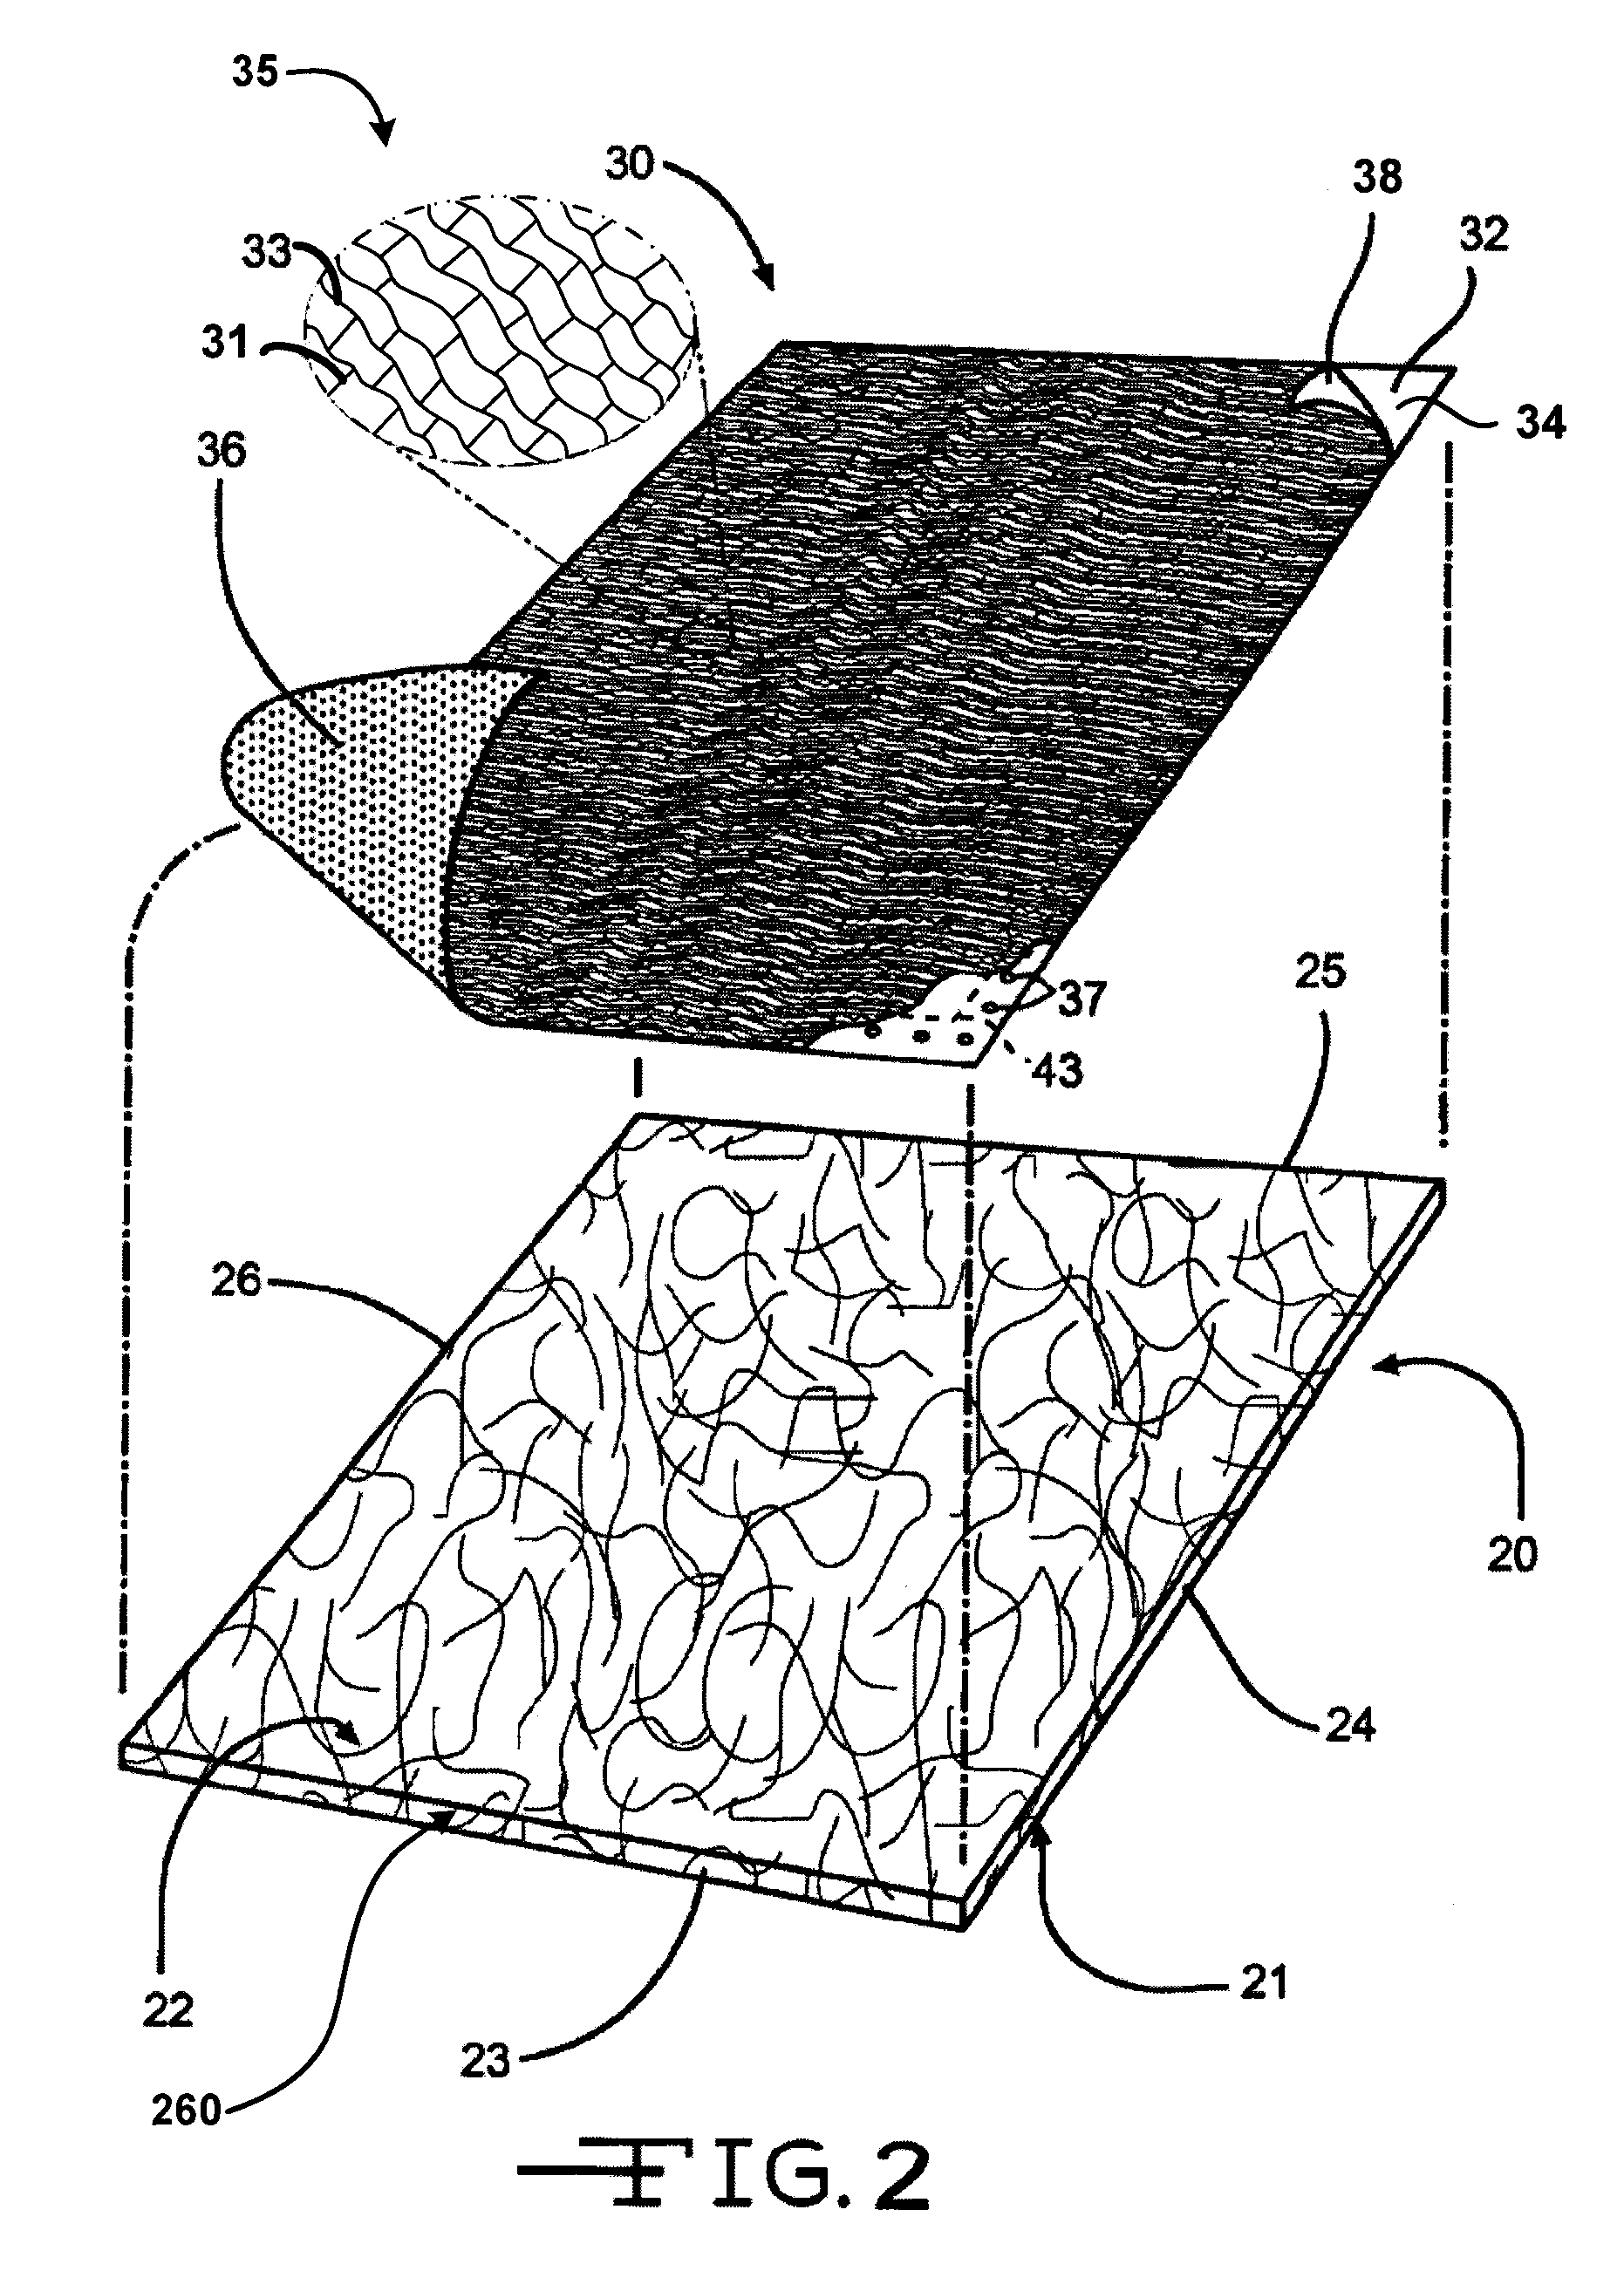 Wall sheathing system and method of installation